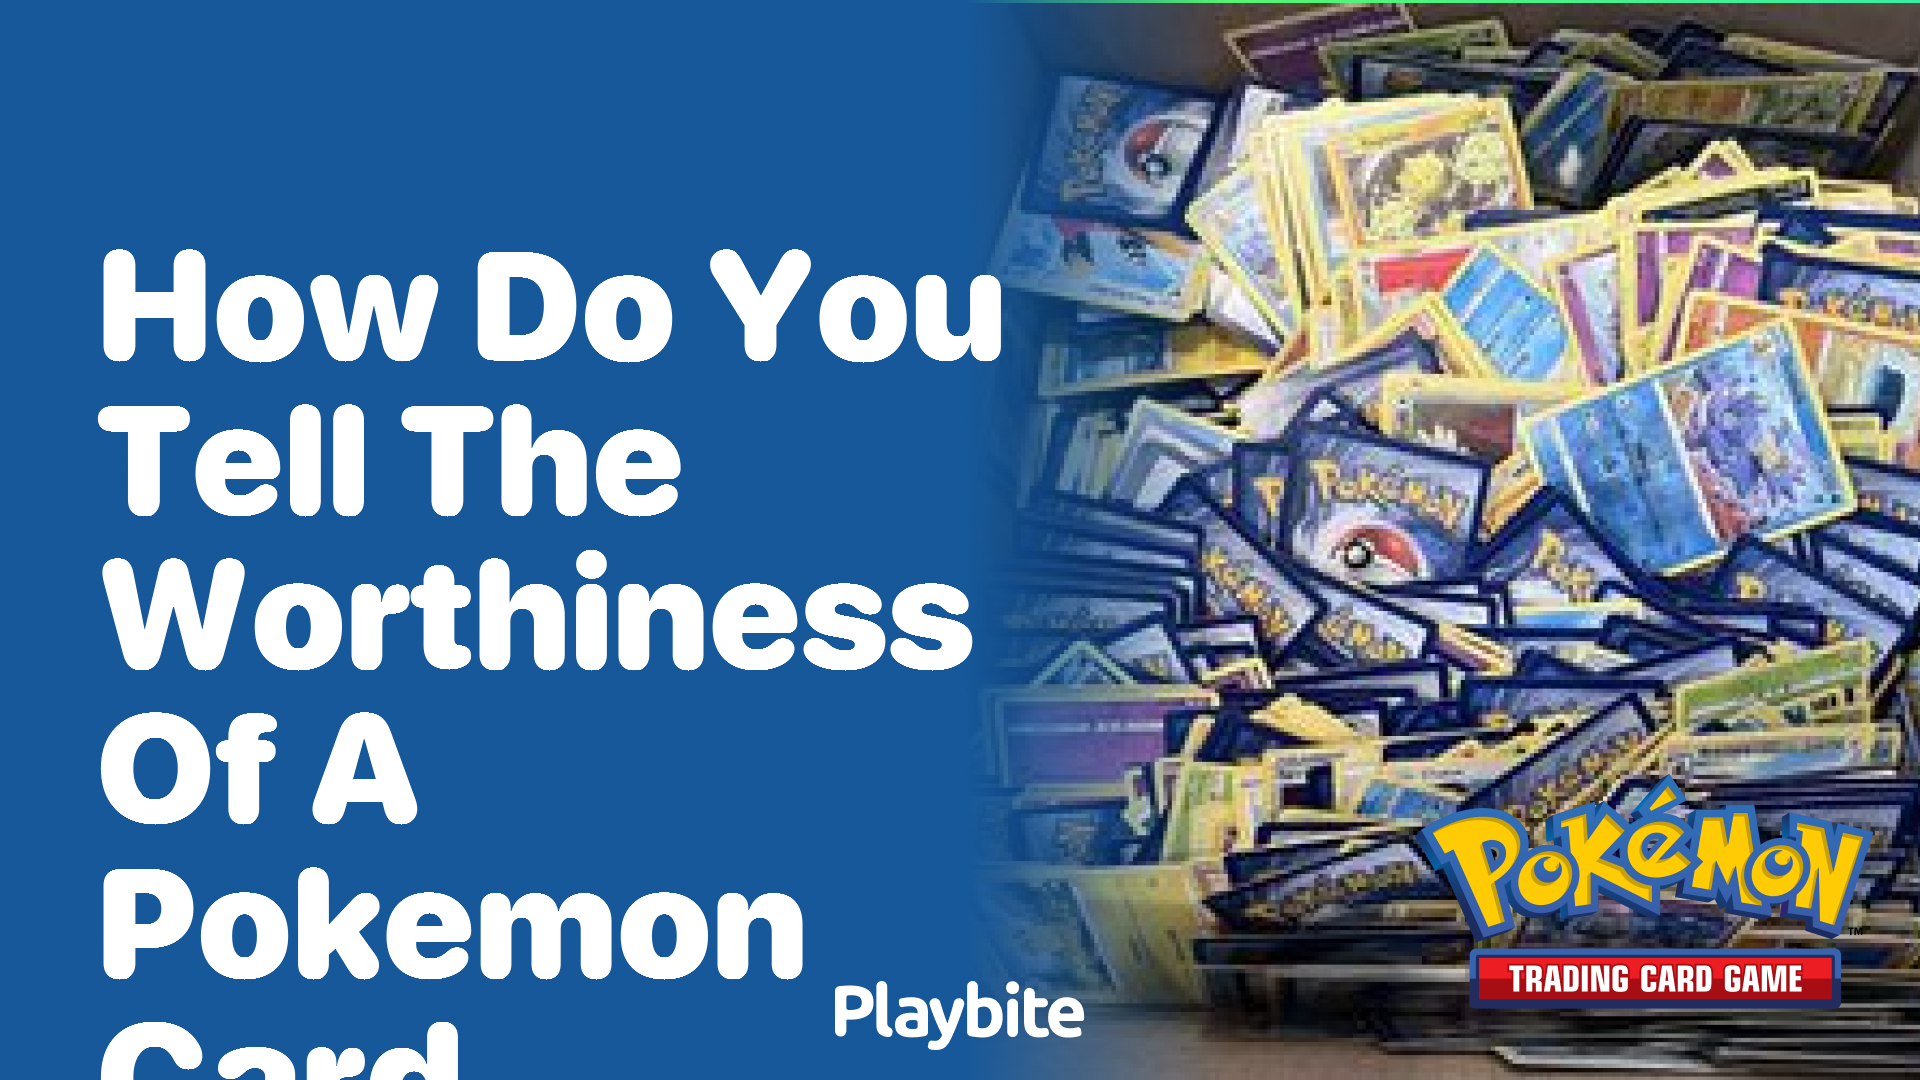 How do you tell the worthiness of a Pokemon card?